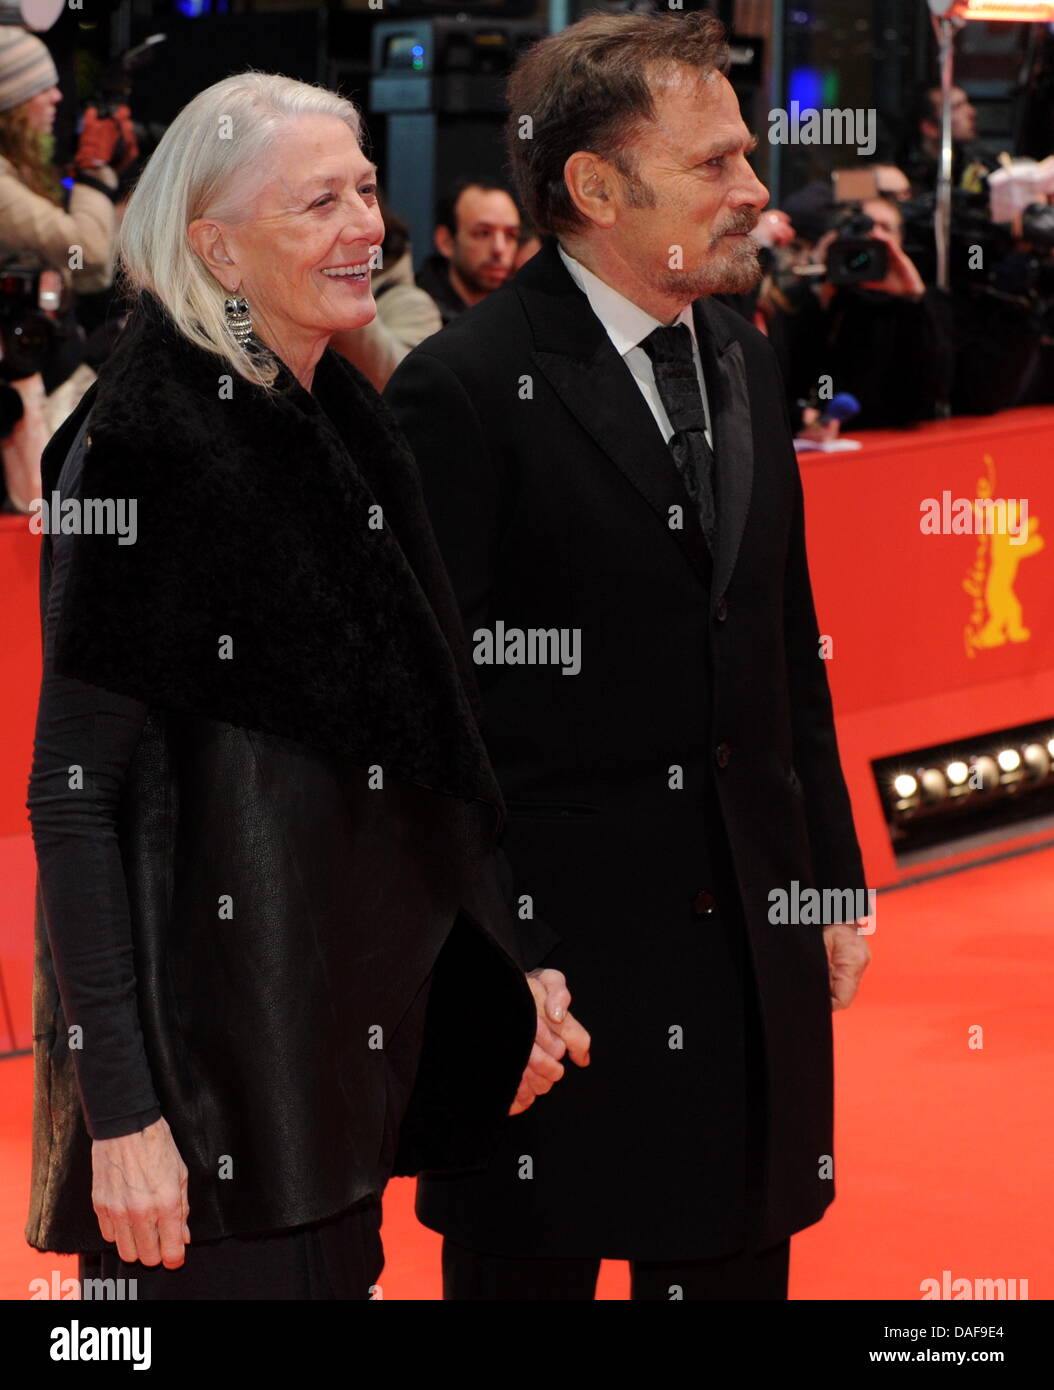 British actress Vanessa Redgrave (l) and her husband, Italian actor Franco Nero arrive for the premiere of the film  'Coriolanus' during the 61st Berlin International Film Festival in Berlin, Germany, 14 February 2011. The film is running in competition of the International Film Festival. The 61st Berlinale takes place from 10 to 20 February 2011. Photo: Tim Brakemeier Stock Photo